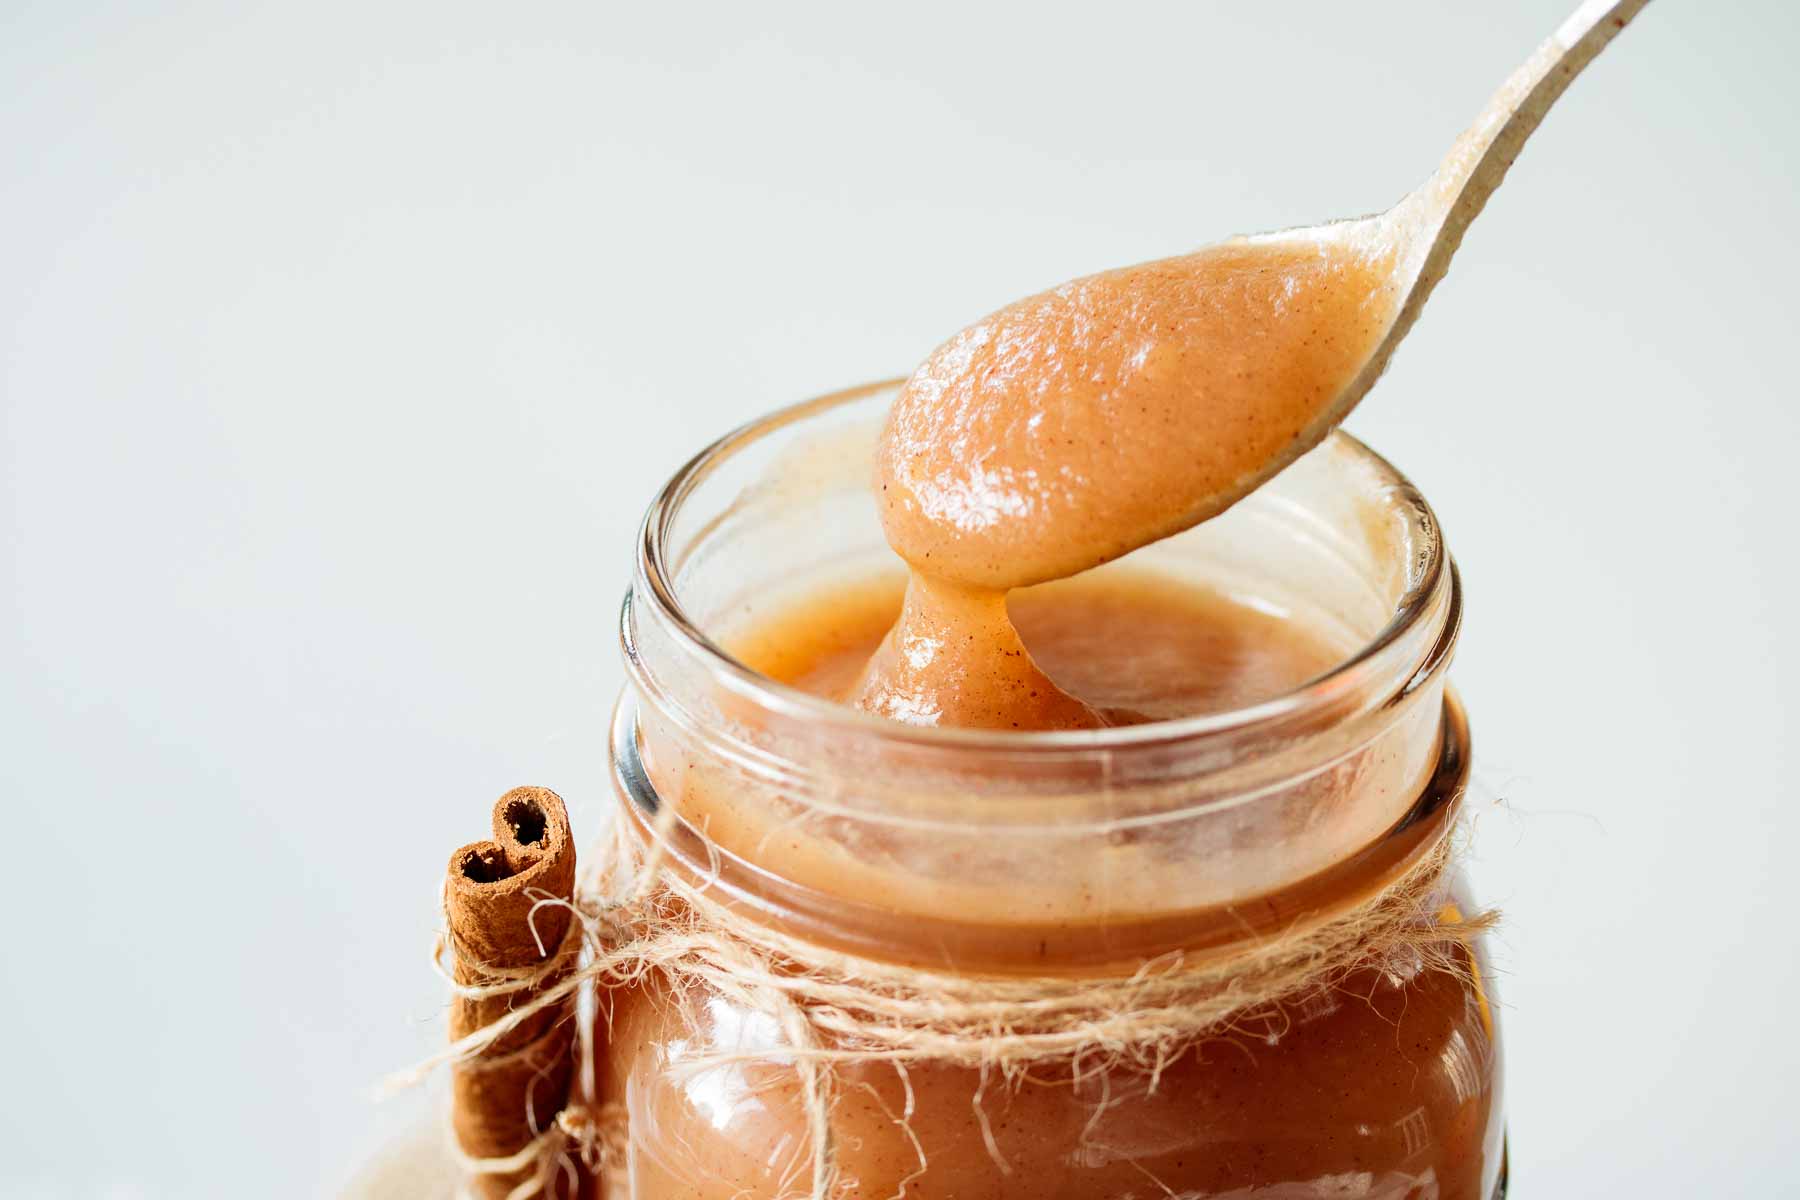 A spoonful of apple butter.